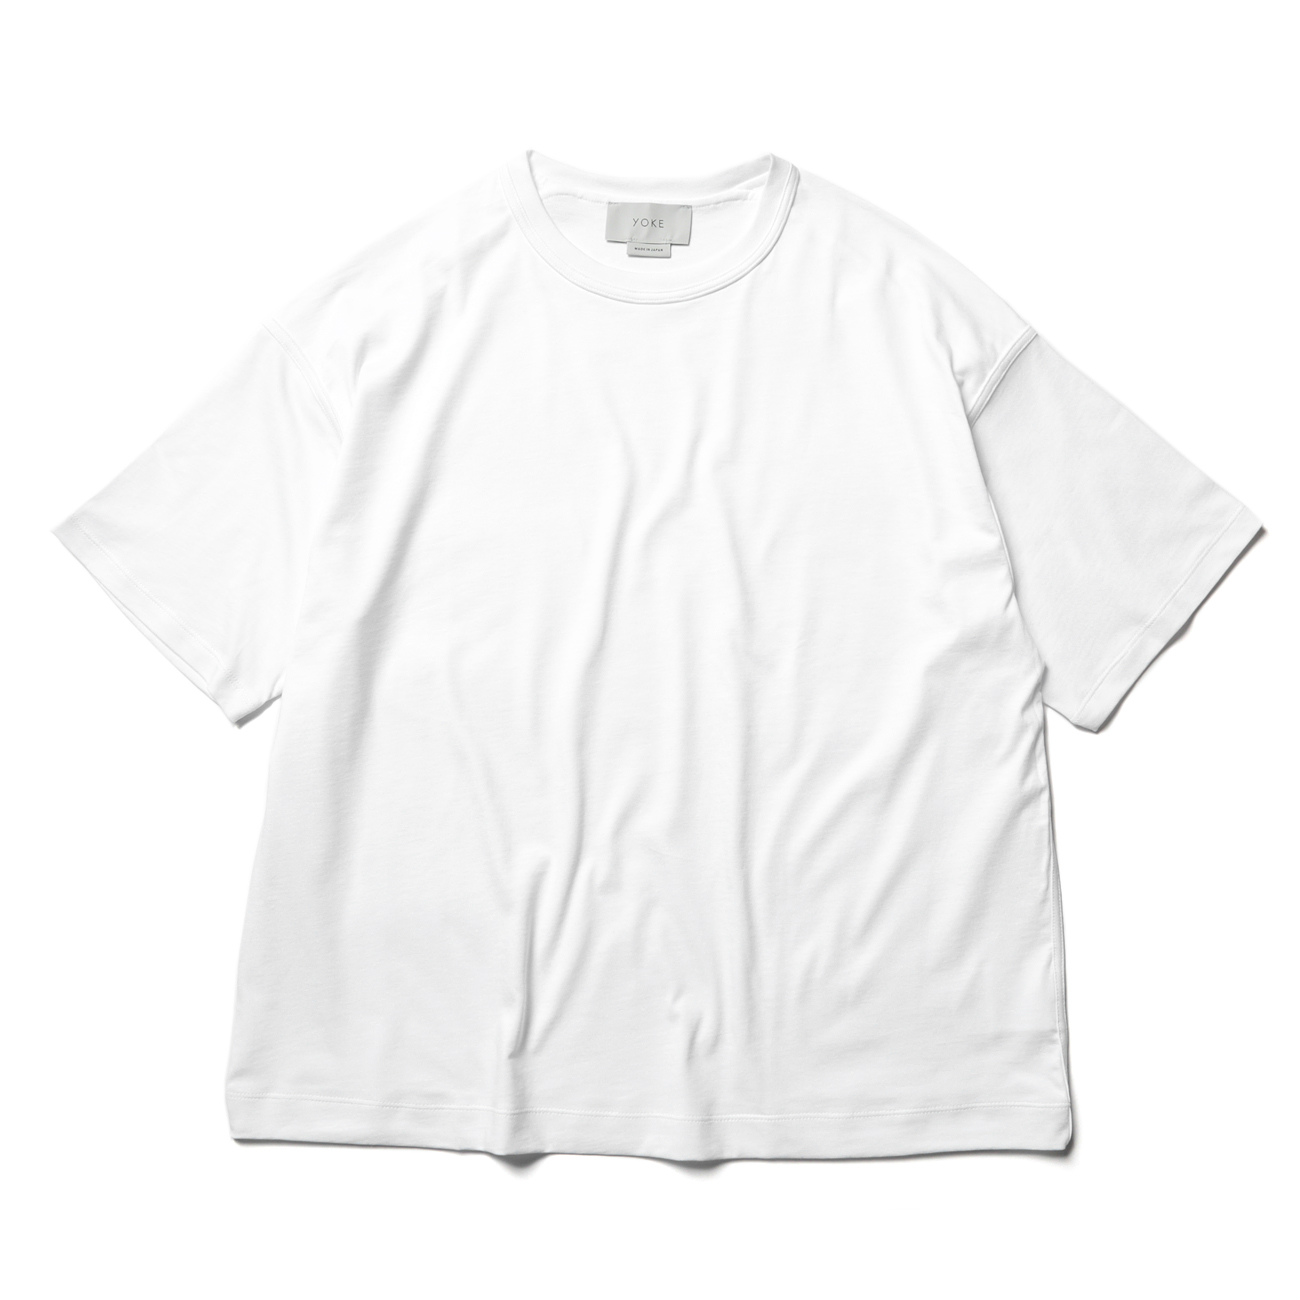 INSIDE OUT T-SHIRTS S/S - White